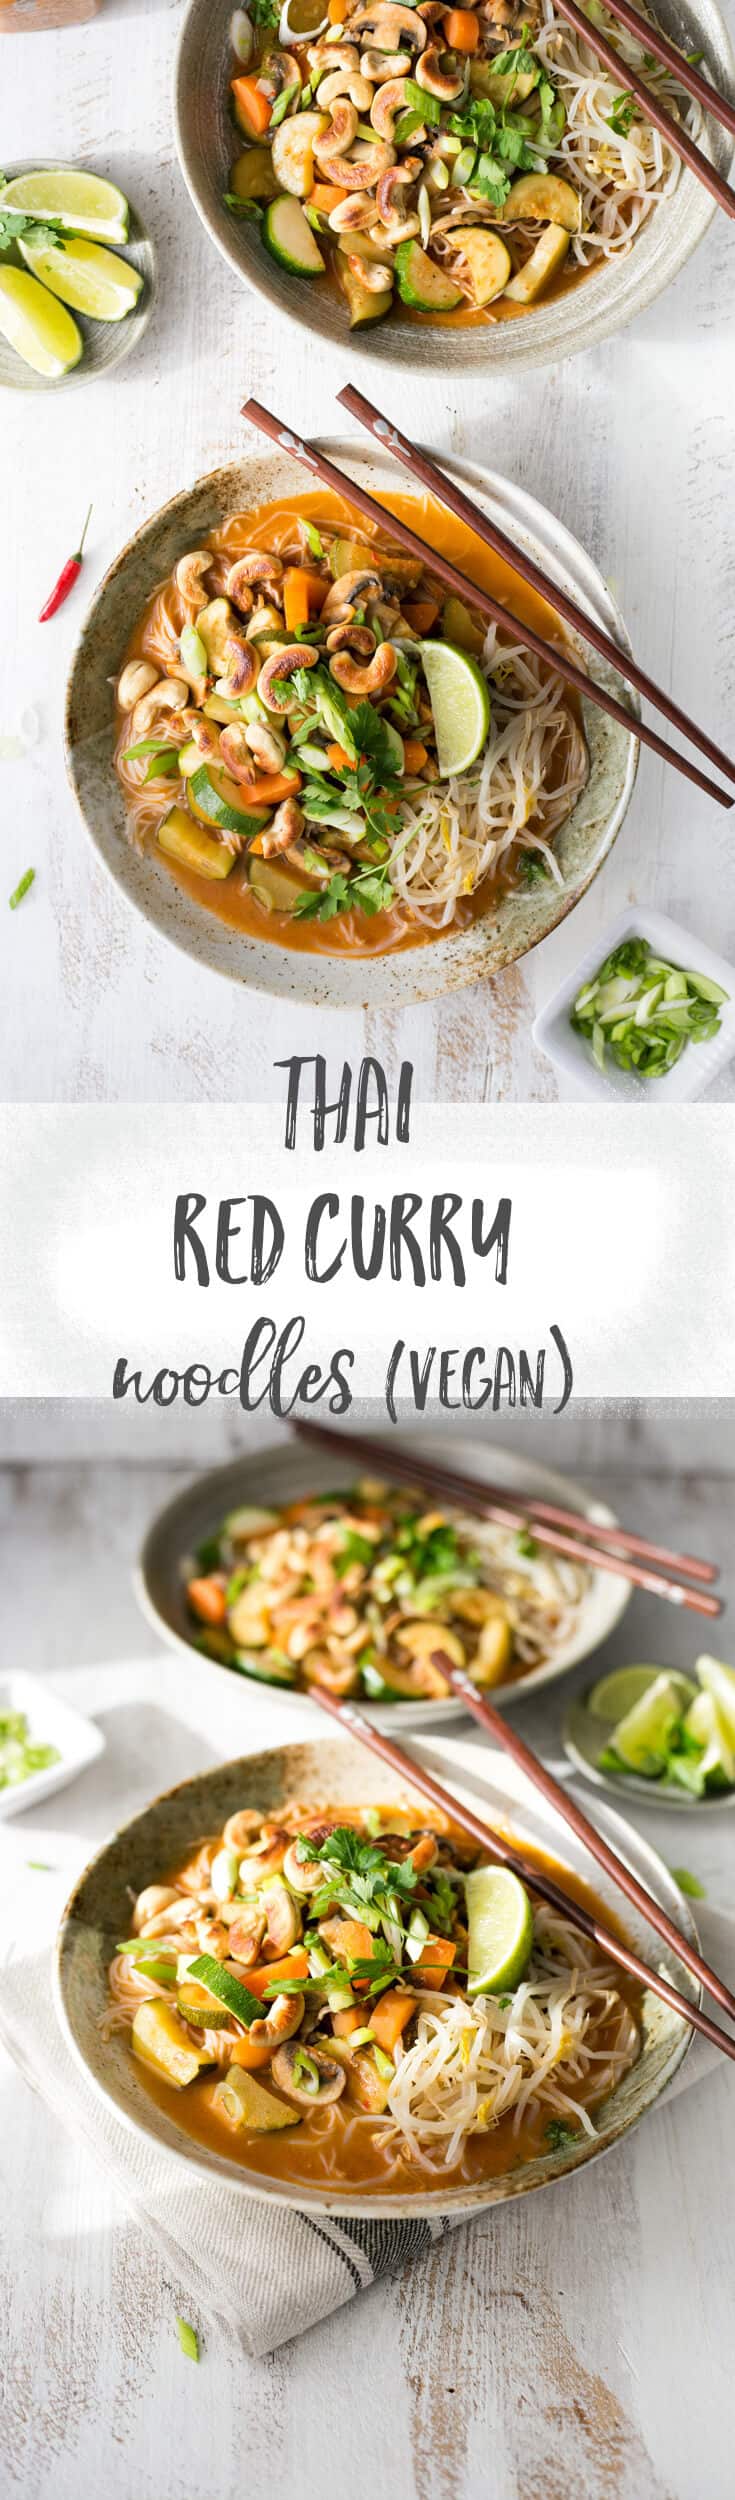 Super easy recipe for Thai red curry noodles. Packed with fantastic flavors and aromas, you will fall in love with it! | via @annabanana.co